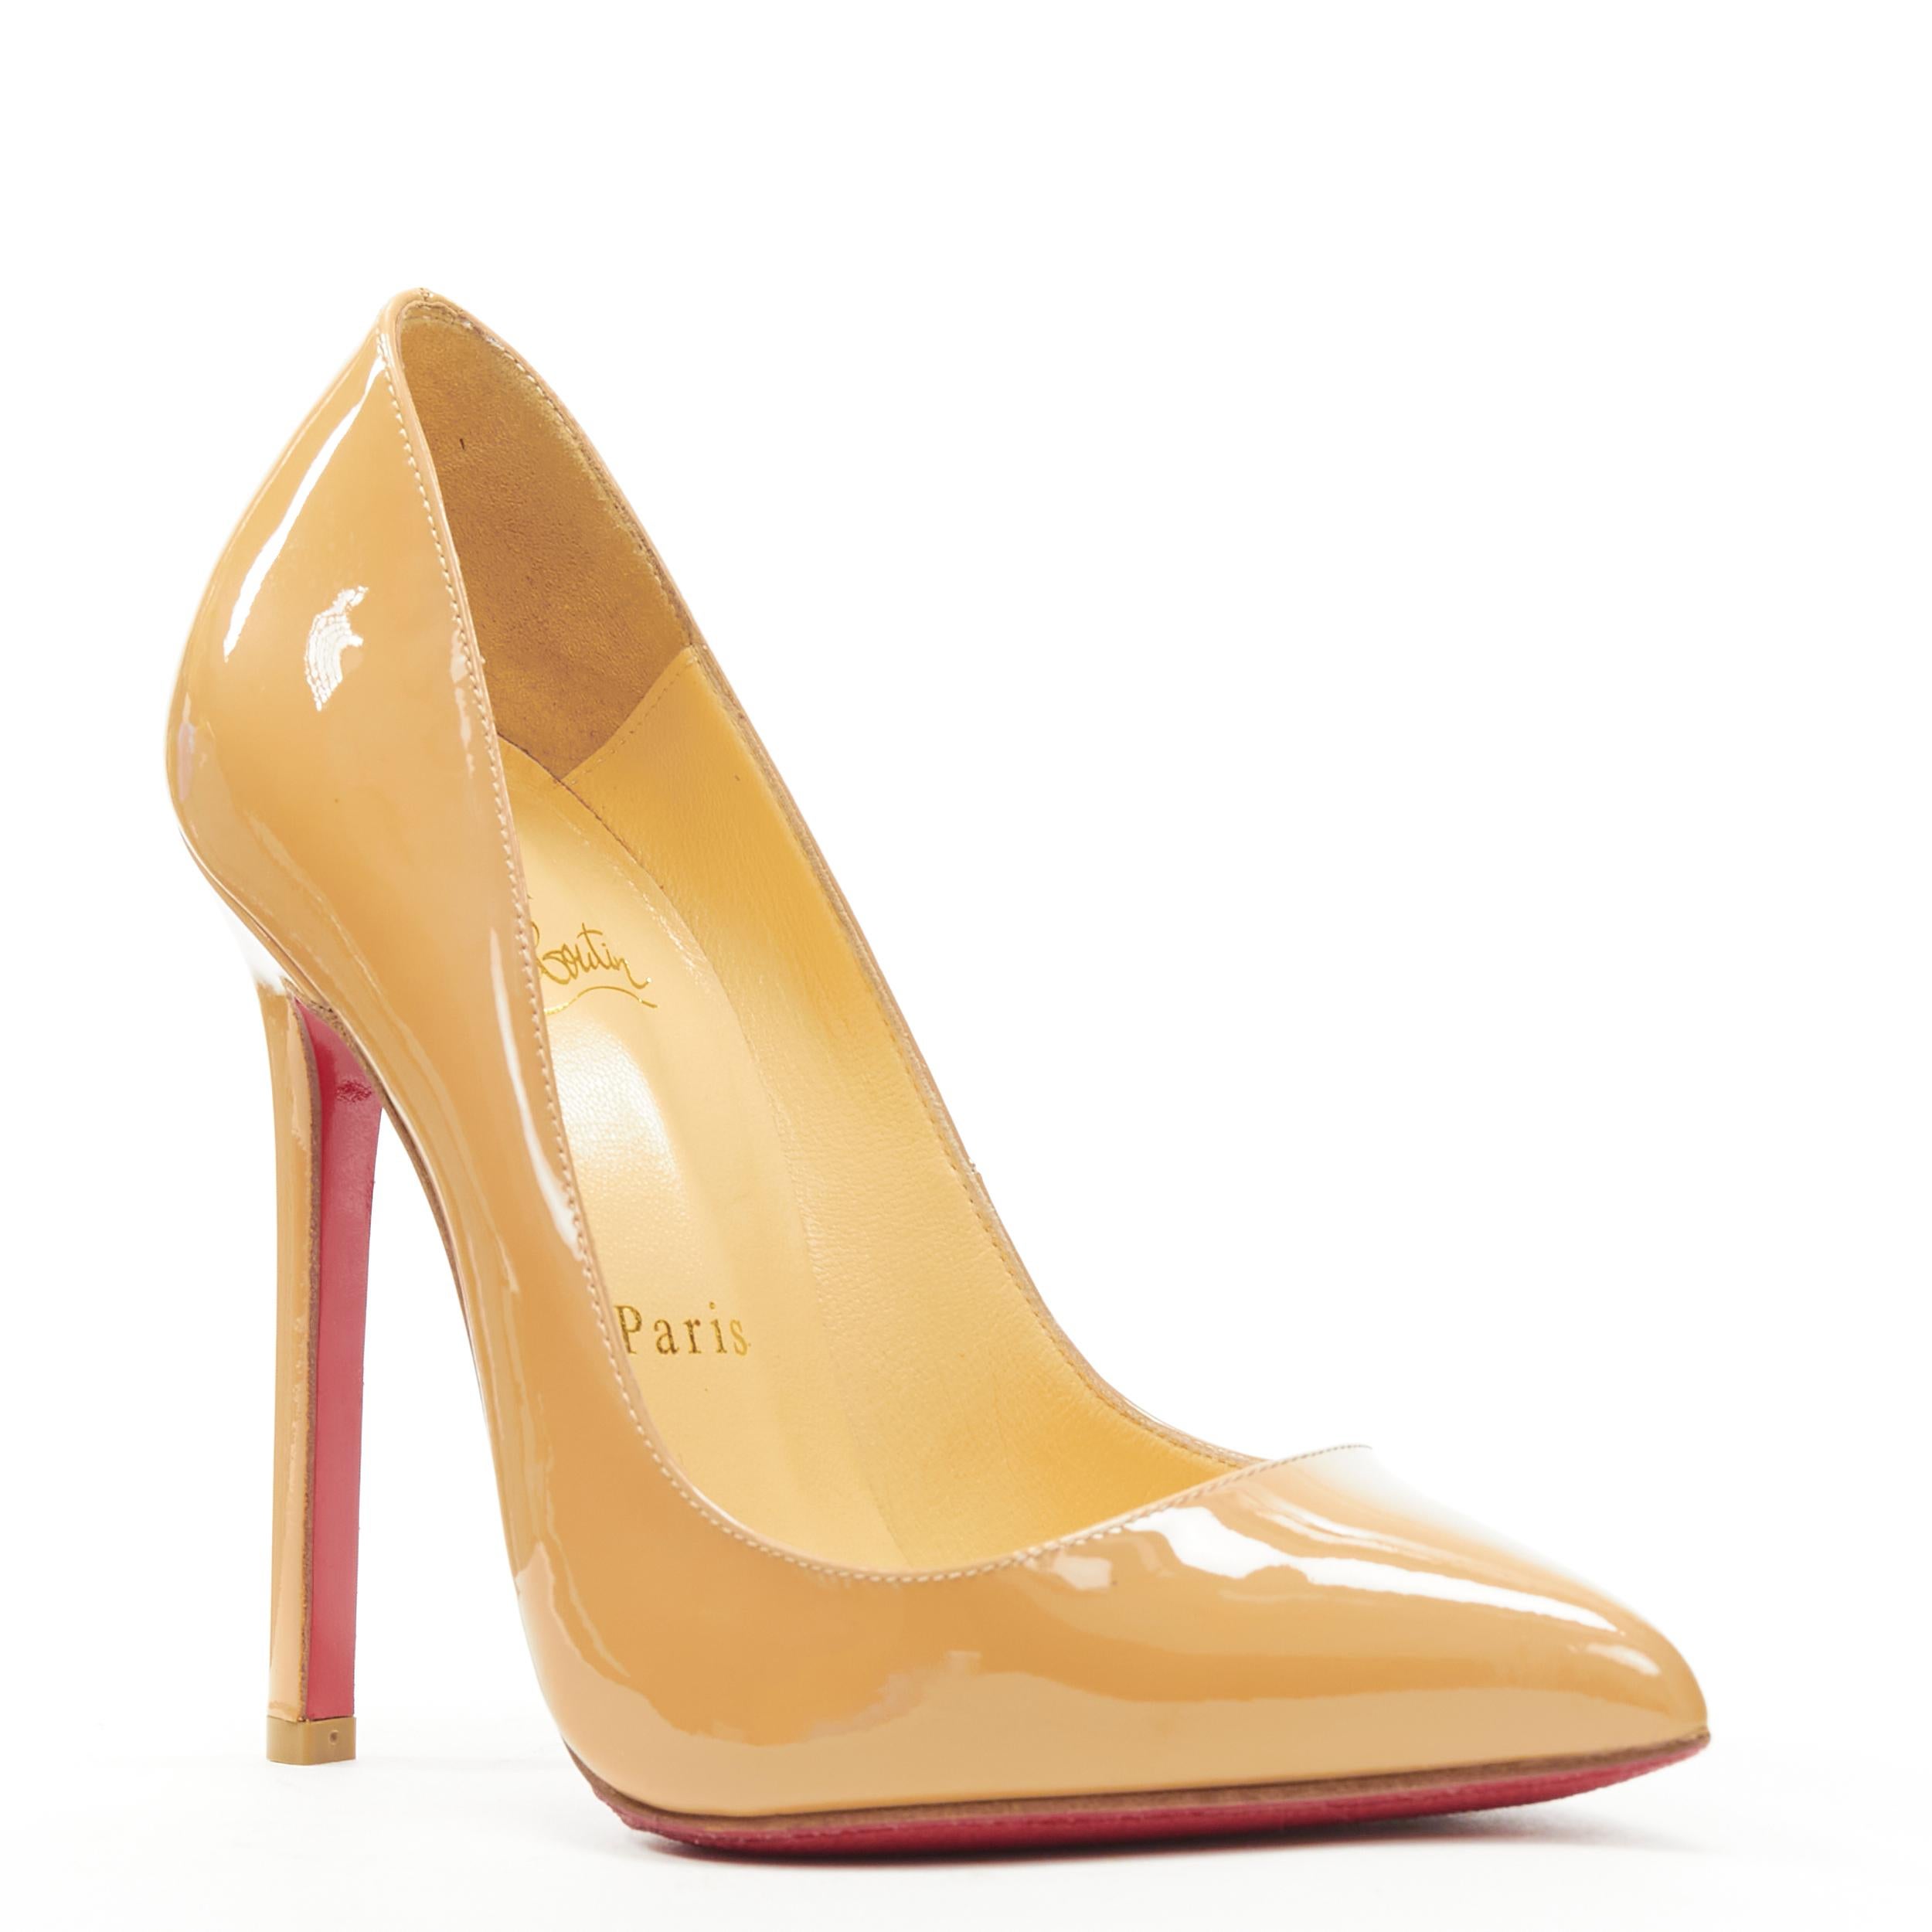 CHRISTIAN LOUBOUTIN Pigalle 120 nude patent point toe stiletto pigalle EU36 
Reference: TGAS/B01083 
Brand: Christian Louboutin 
Designer: Christian Louboutin 
Model: Pigalle 120 nude patent 
Material: Patent Leather 
Color: Beige 
Pattern: Solid